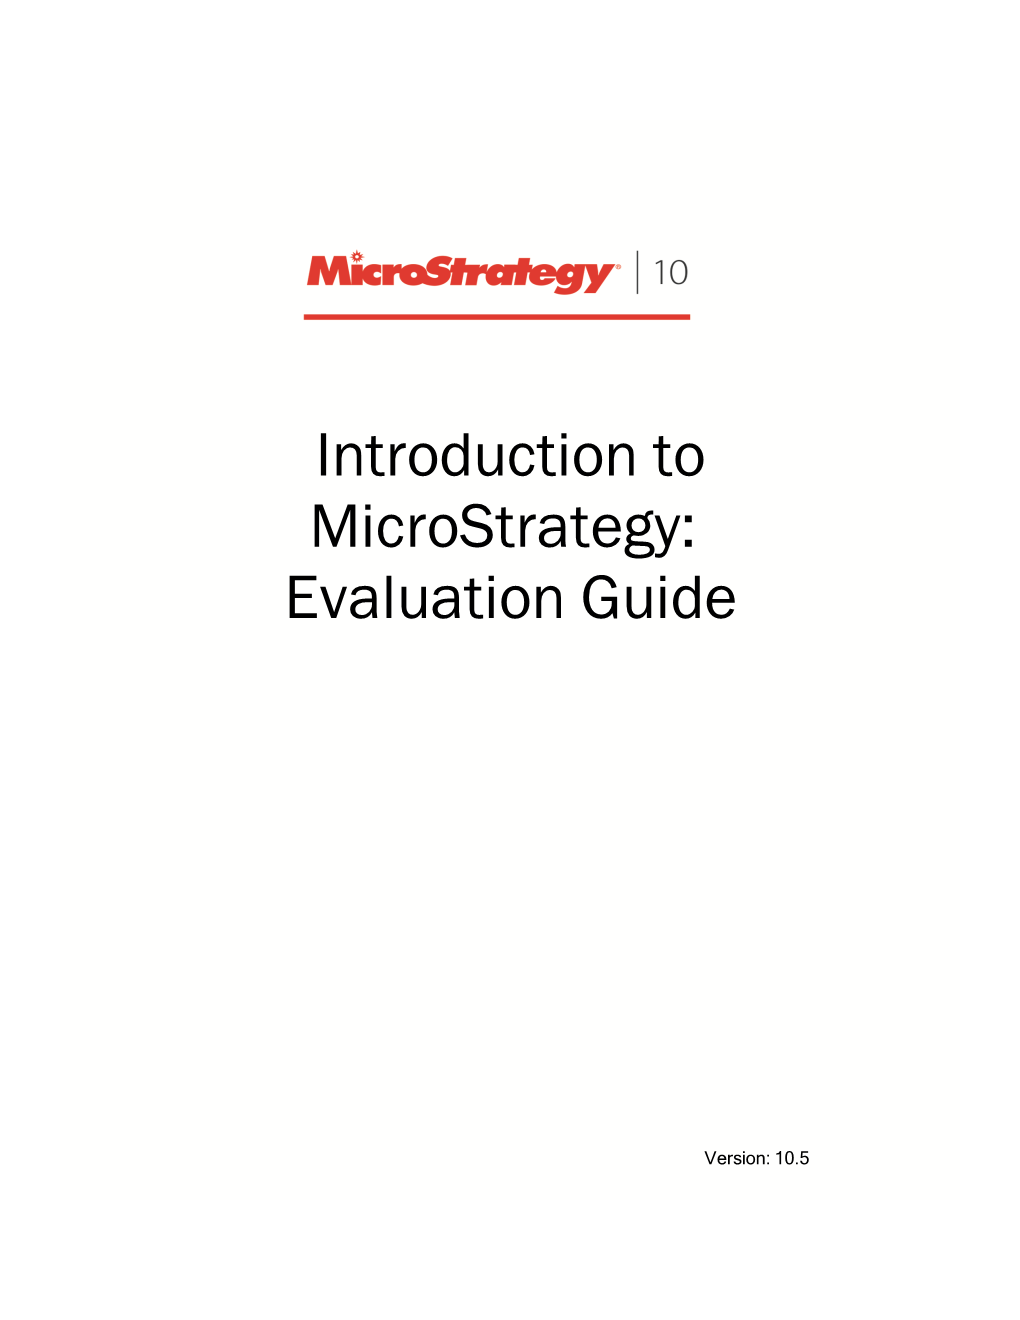 Introduction to Microstrategy: Evaluation Guide